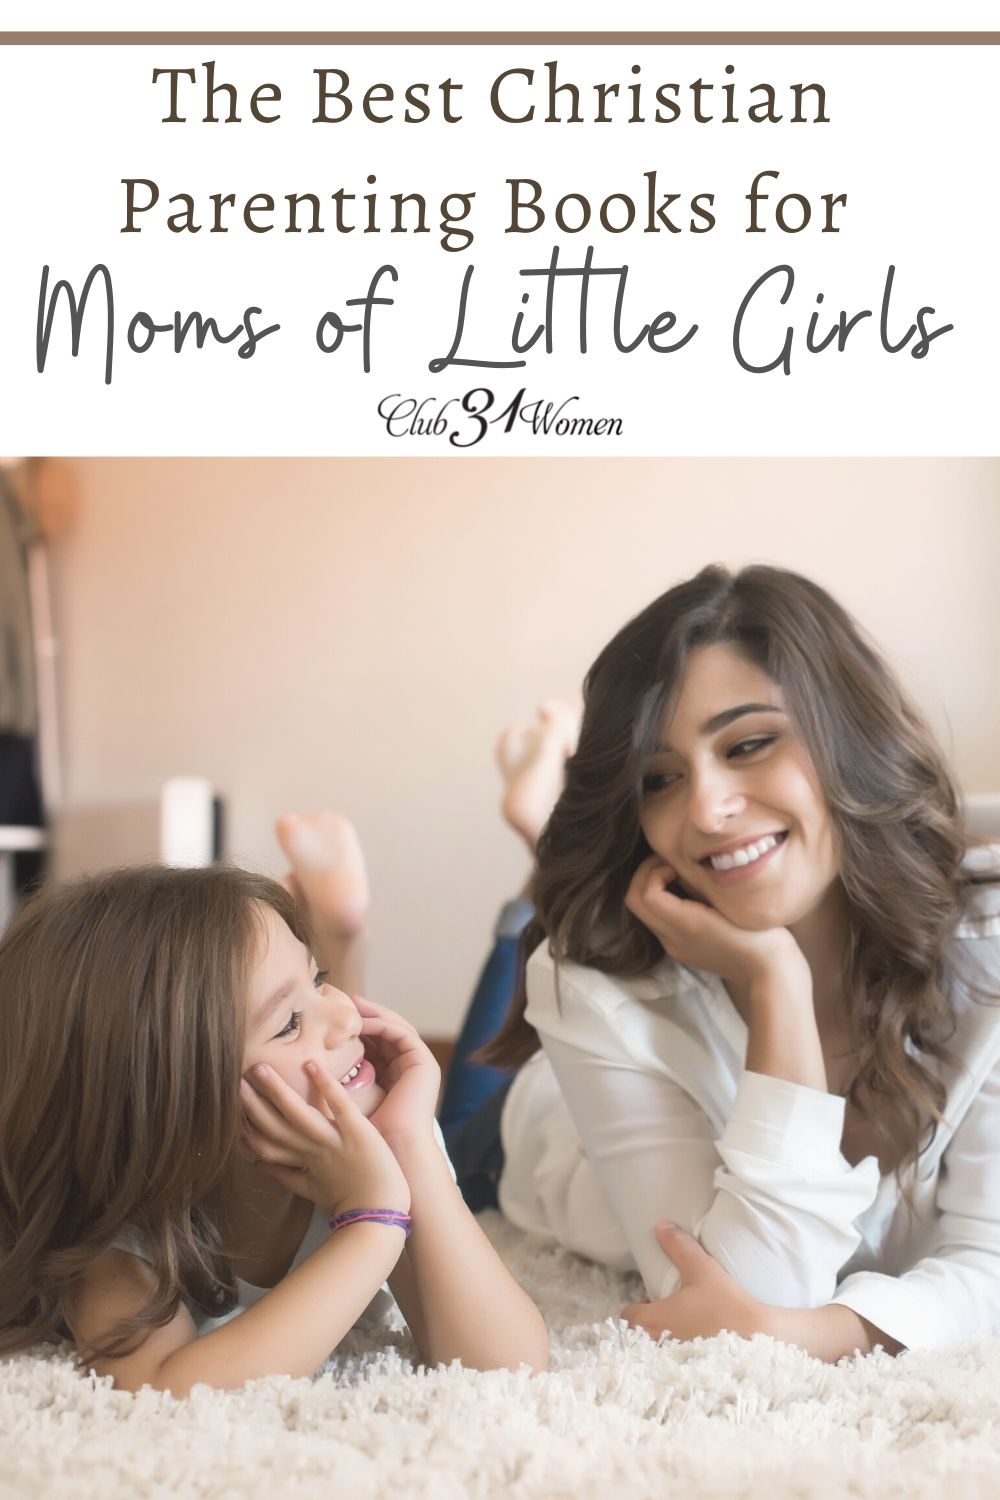 Being a mom of a little girl is such a delight and gift! These books will help guide and encourage parents on the journey of raising their sweet girl. via @Club31Women